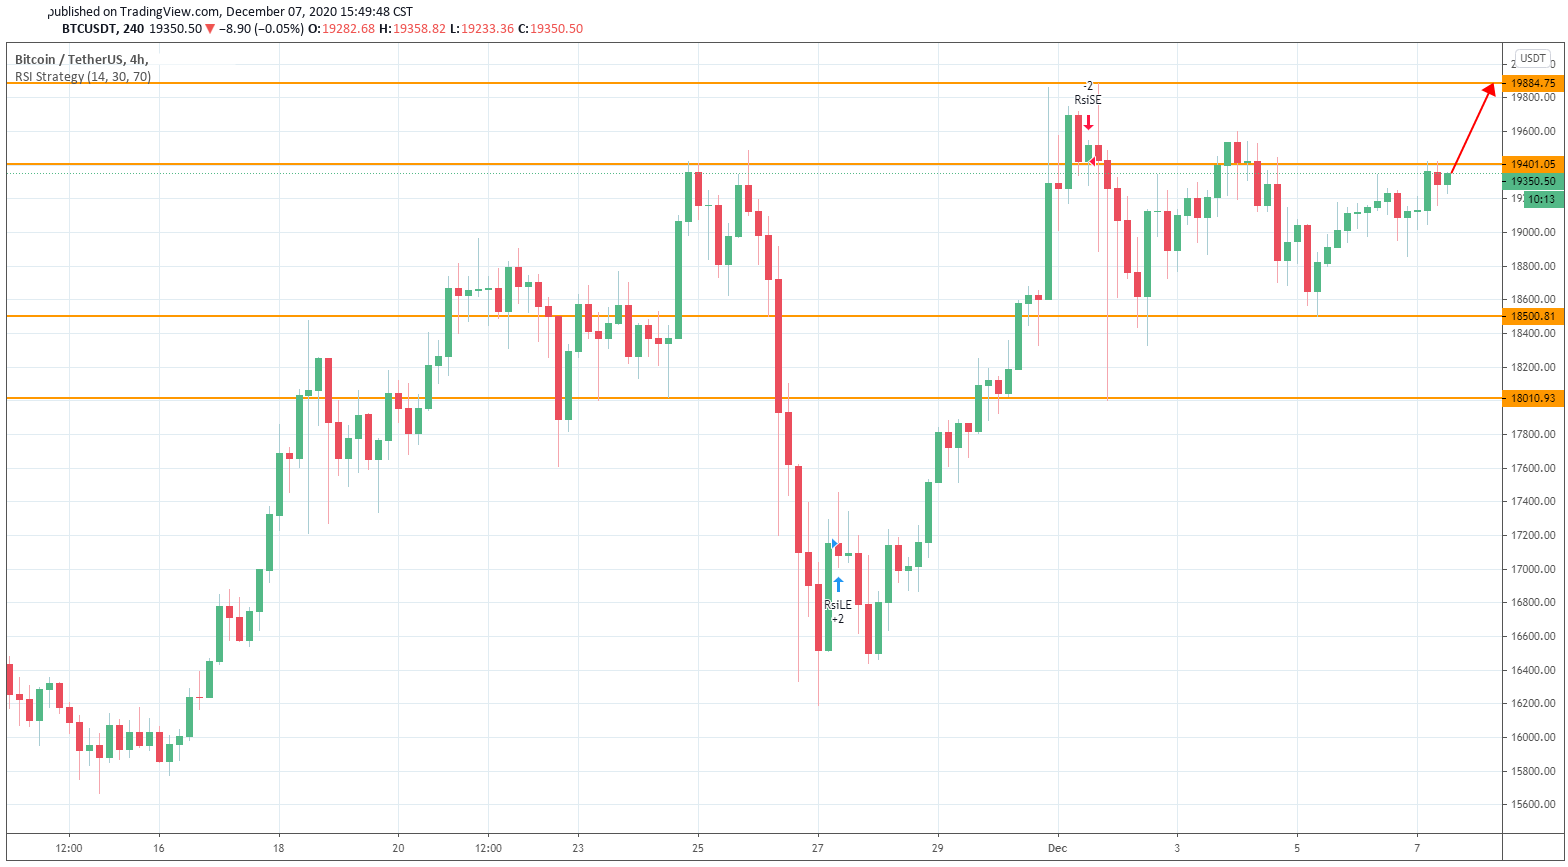 The BTC Bulls Seem to Prevail the Battle Soon as the Institutional Fund Keeps Inflowing